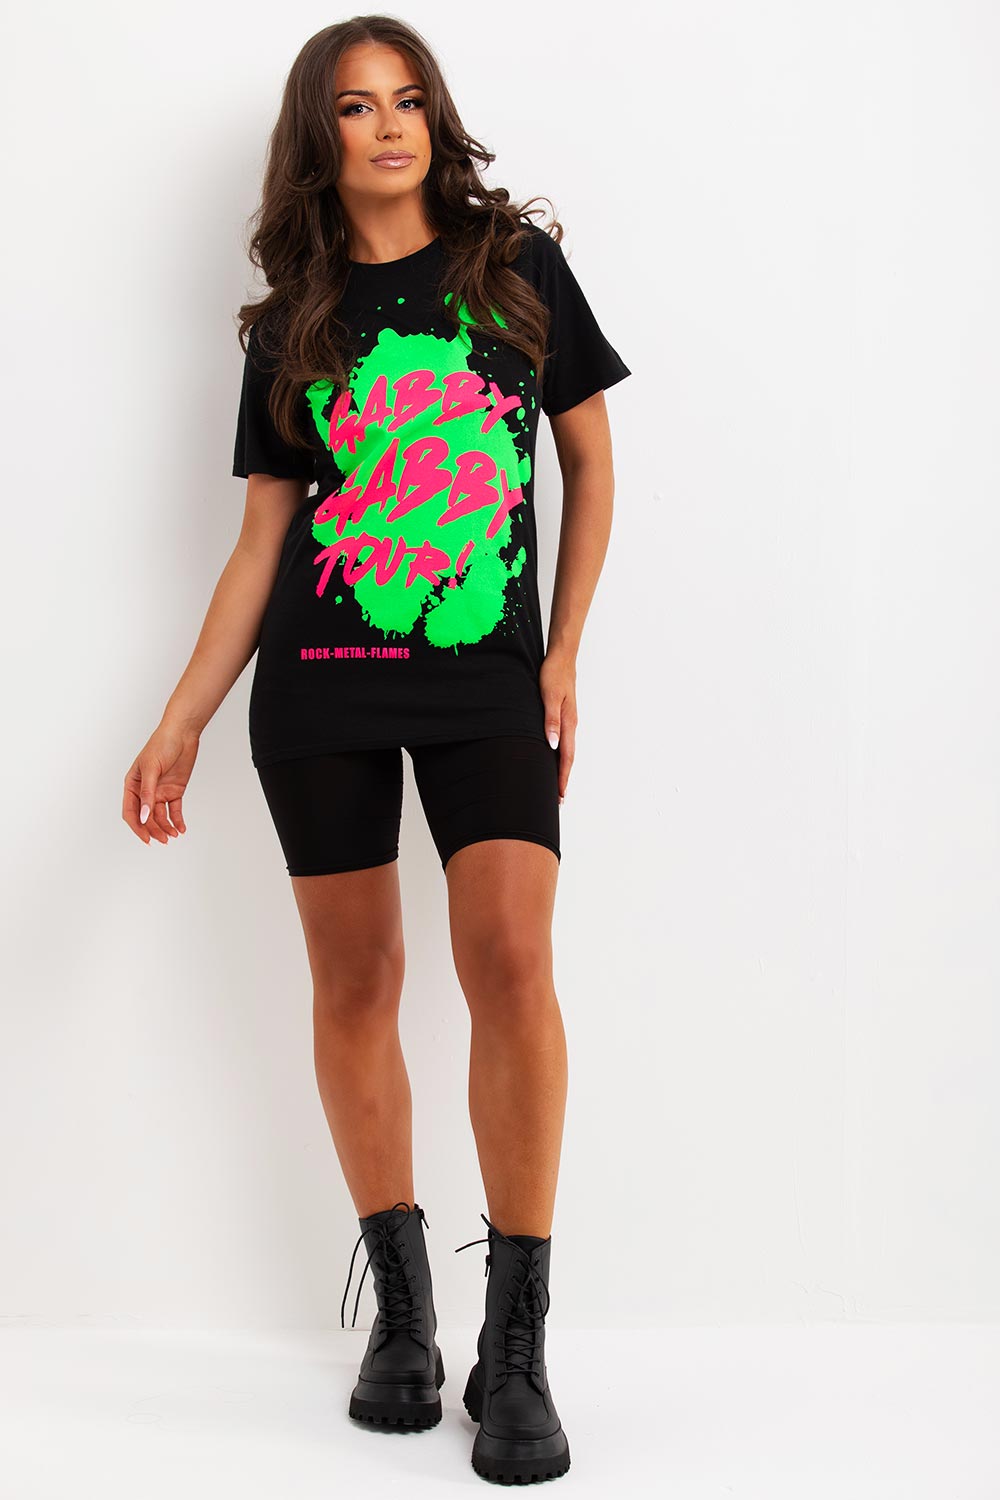 gabby gabby neon graphic festival rave t shirt outfit